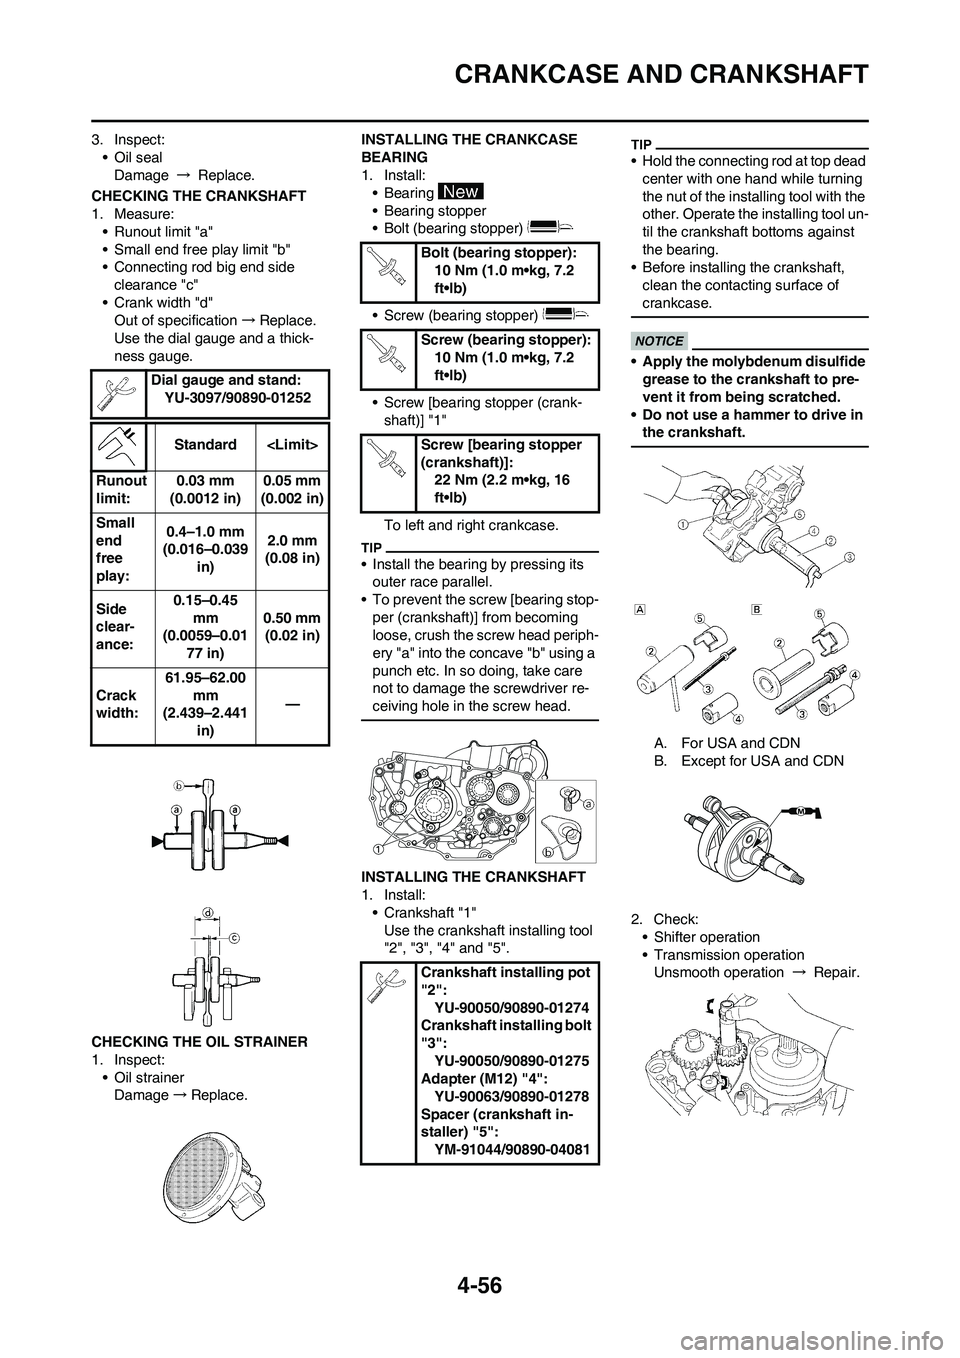 YAMAHA YZ450F 2011  Owners Manual 4-56
CRANKCASE AND CRANKSHAFT
3. Inspect:
• Oil seal
Damage → Replace.
CHECKING THE CRANKSHAFT
1. Measure:
• Runout limit "a"
• Small end free play limit "b"
• Connecting rod big end side 
c